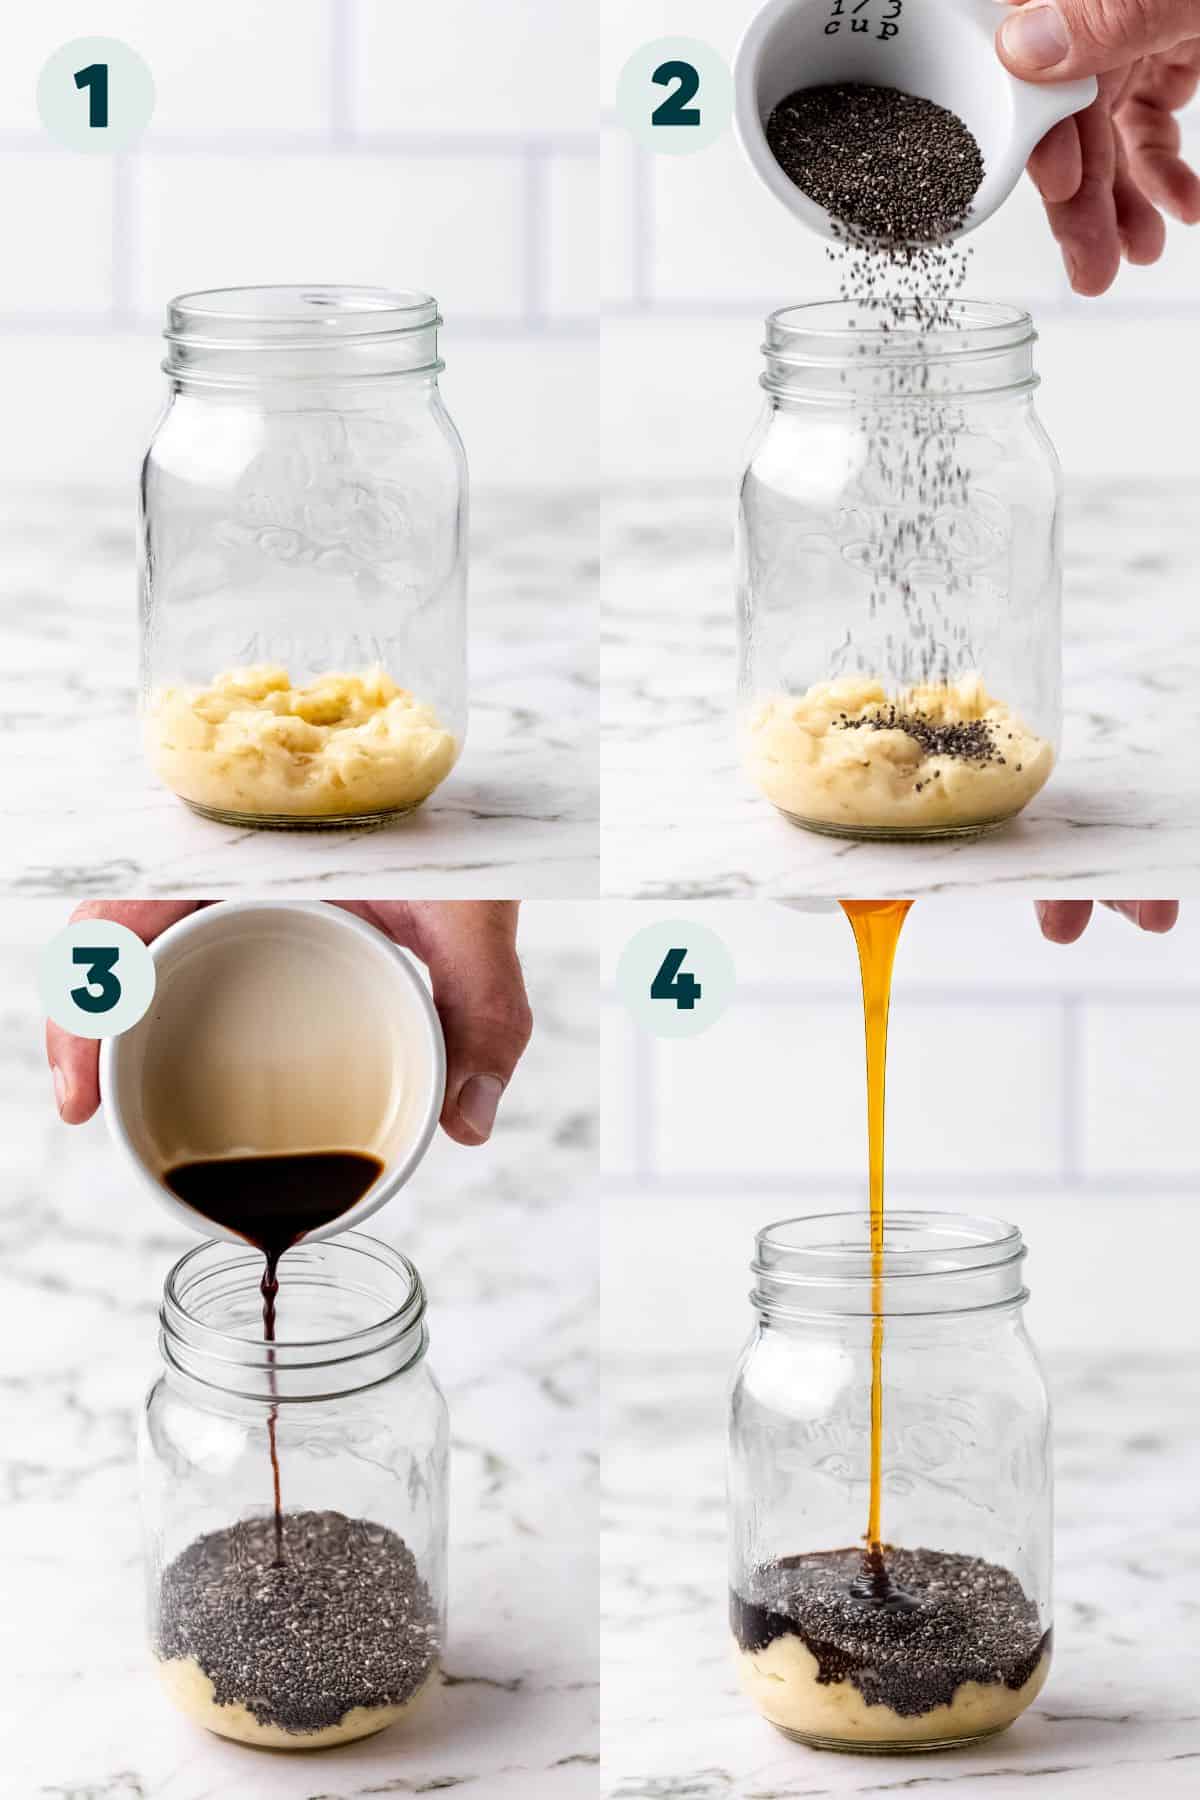 Step by step photos showing adding banana pudding ingredients to the jar.